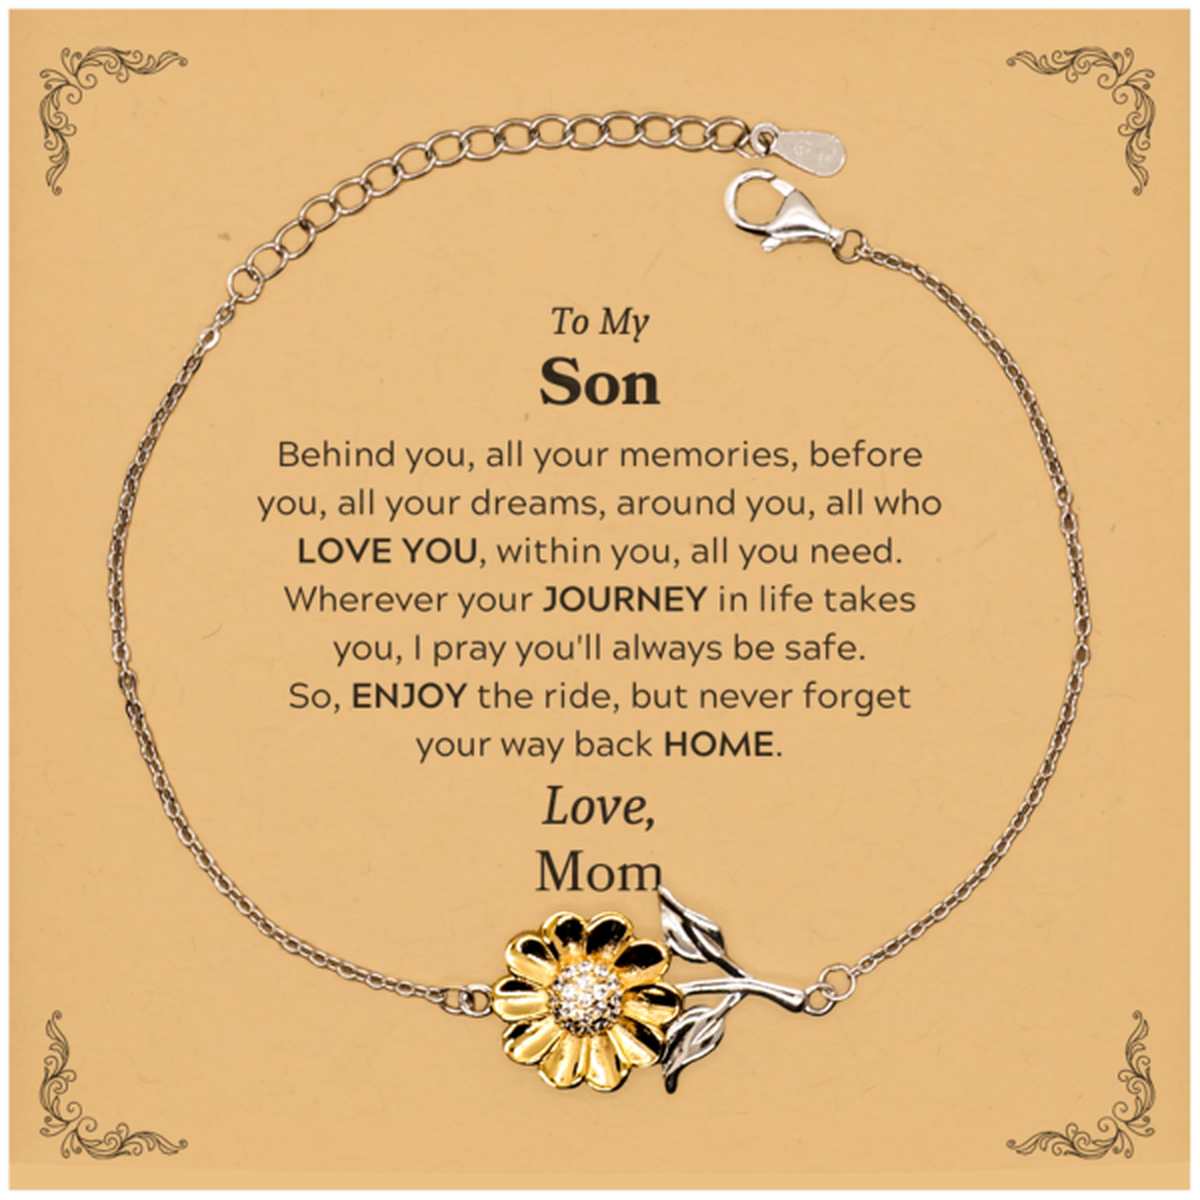 To My Son Graduation Gifts from Mom, Son Sunflower Bracelet Christmas Birthday Gifts for Son Behind you, all your memories, before you, all your dreams. Love, Mom